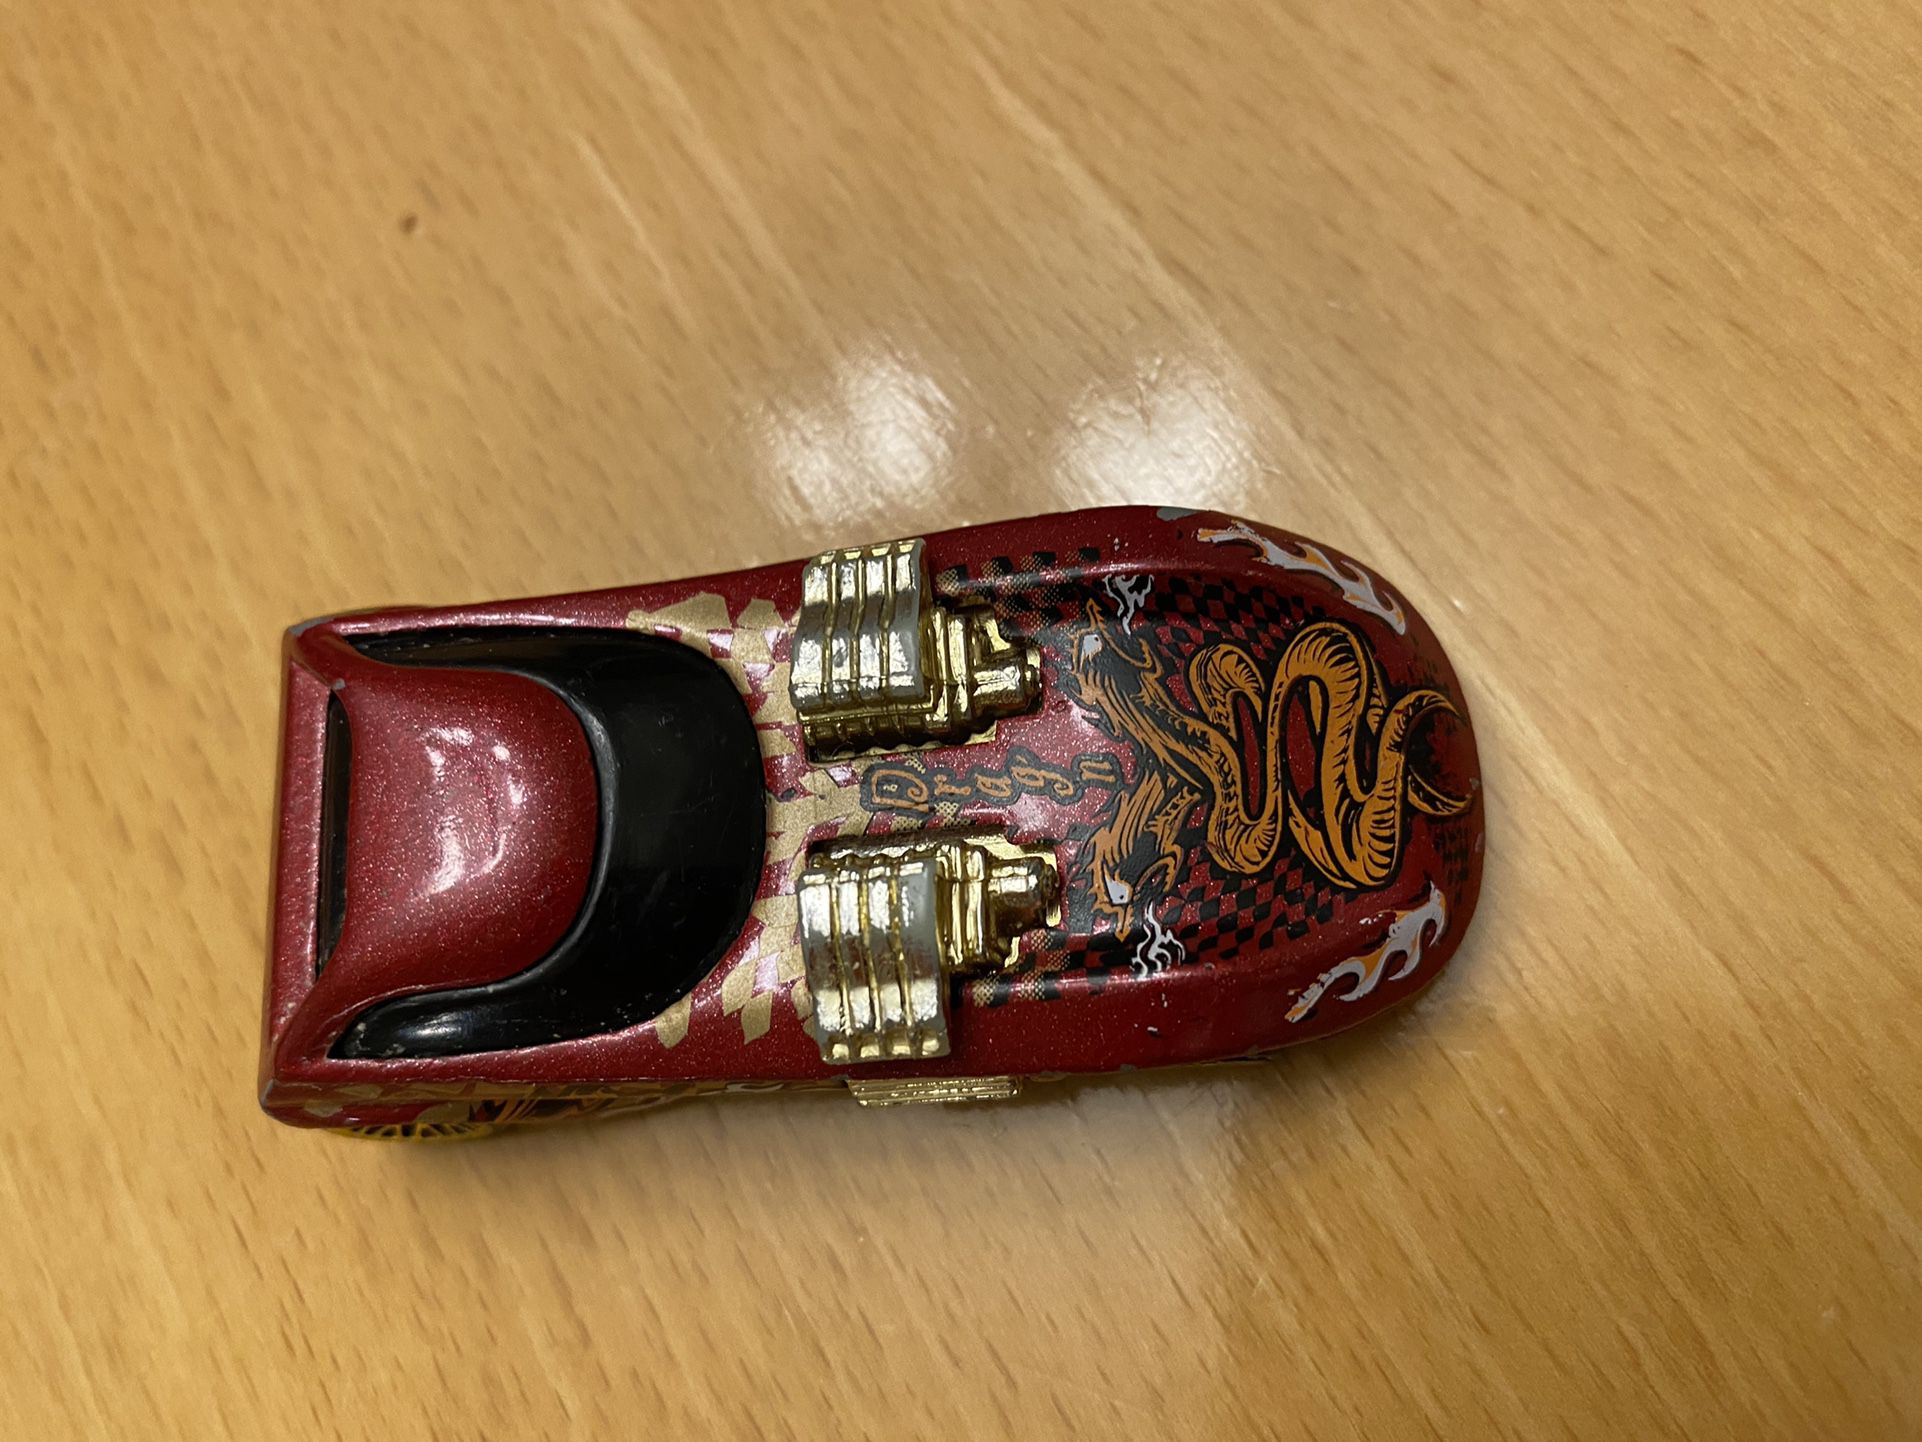 2001 Hot Wheels Extreme Sports Twin Mill II Dark Red Die Cast Toy Car Vehicle 1993